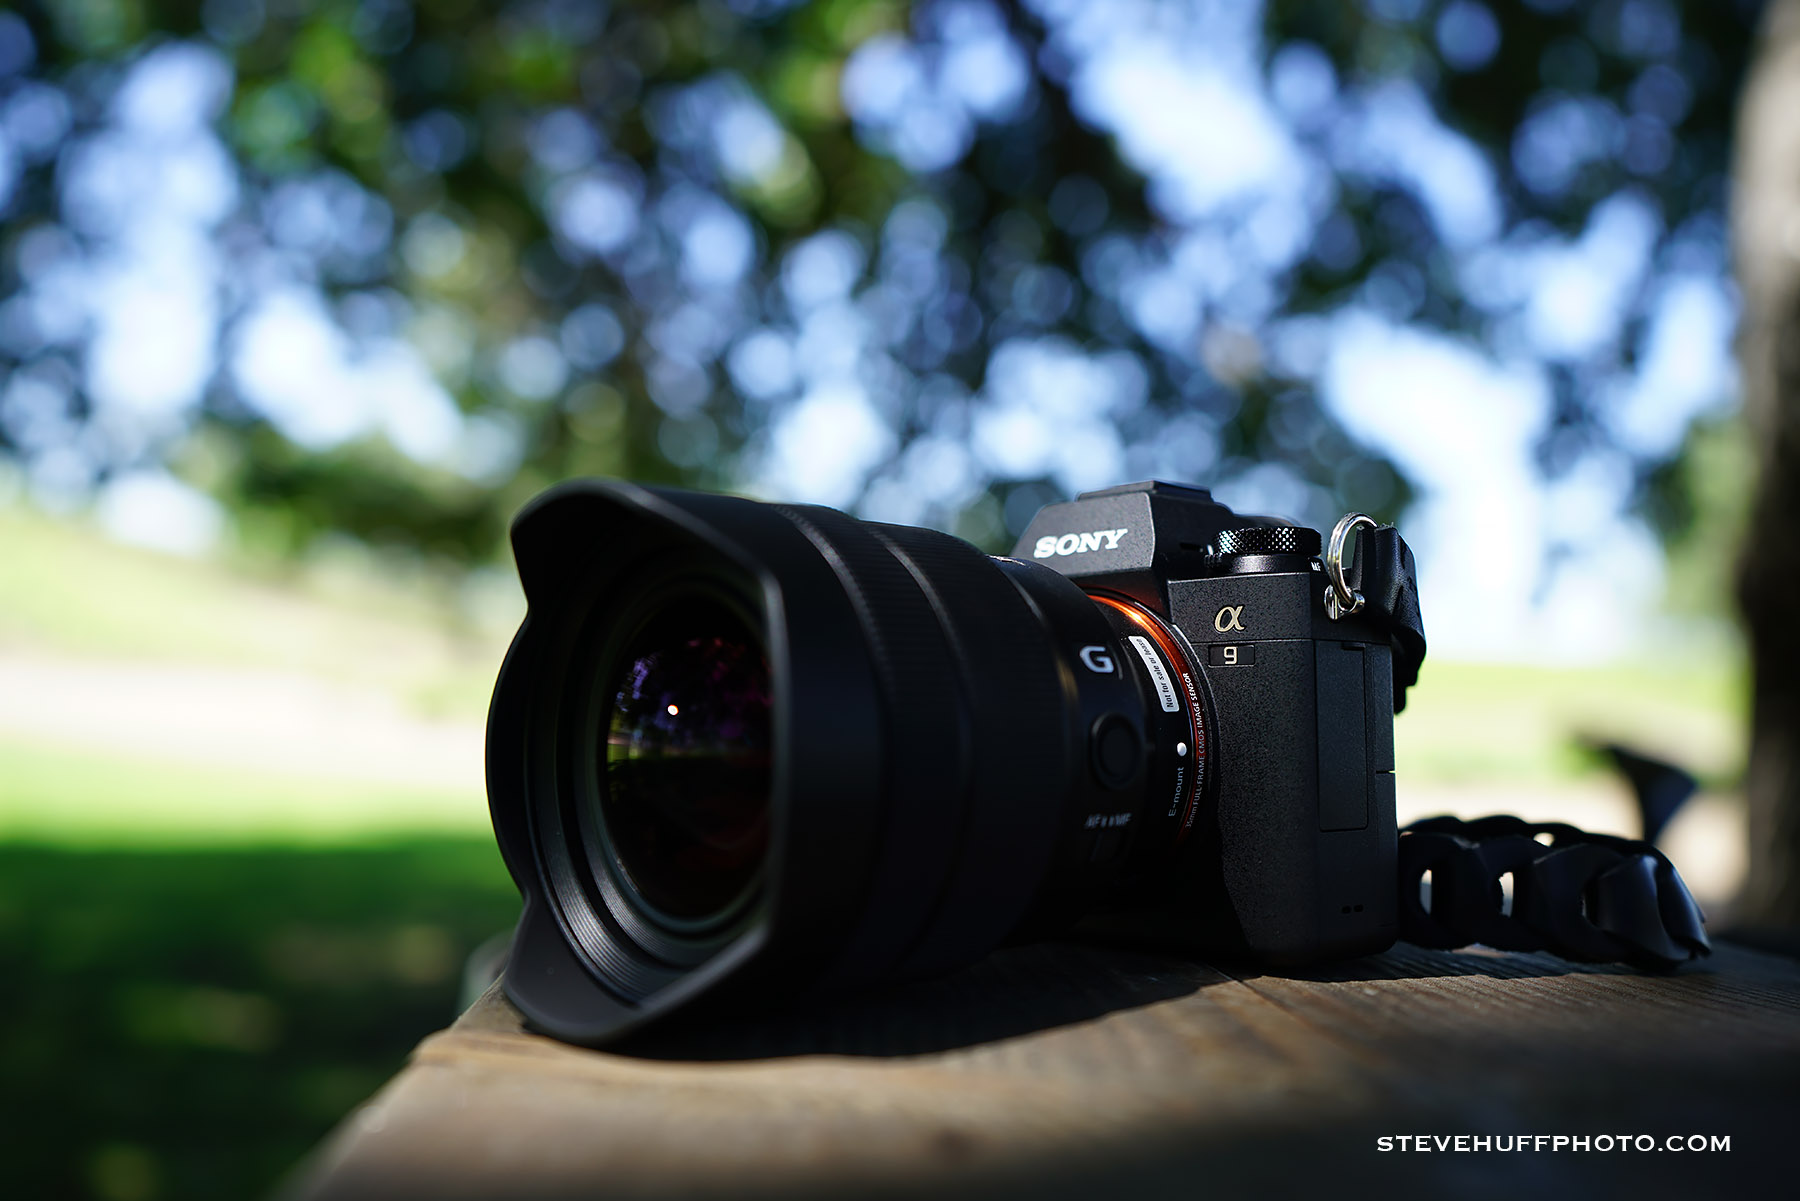 HANDS ON! First look at the amazing Sony 16-35 f/2.8 G Master Lens 